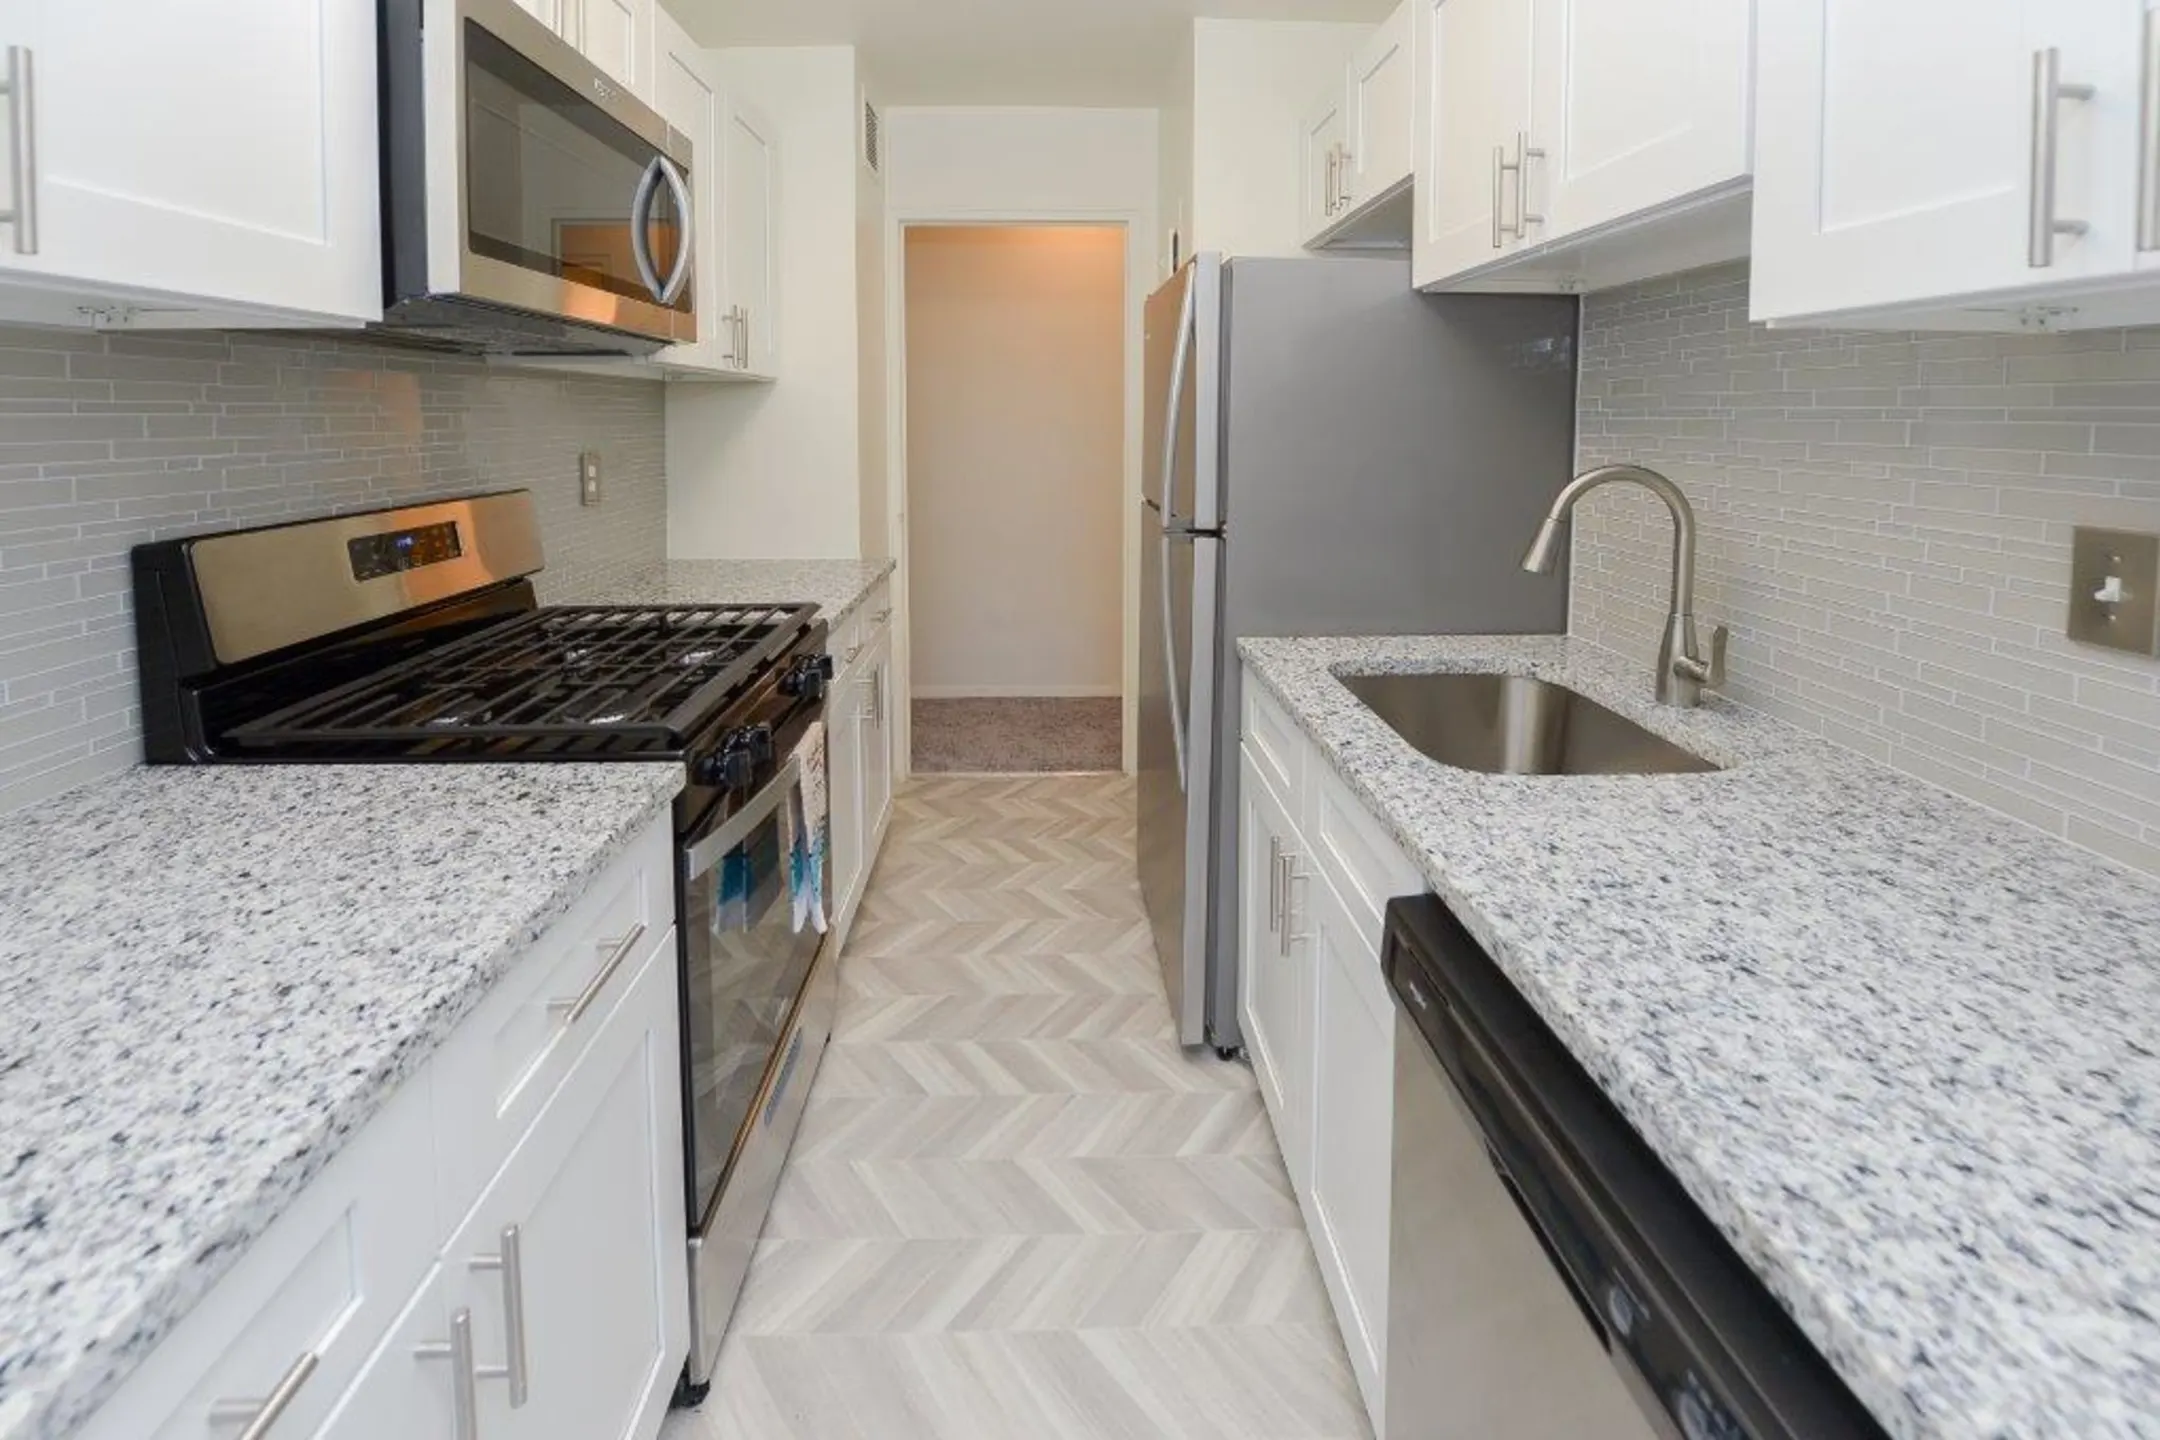 Kitchen - The Carlyle Apartment Homes - Baltimore, MD